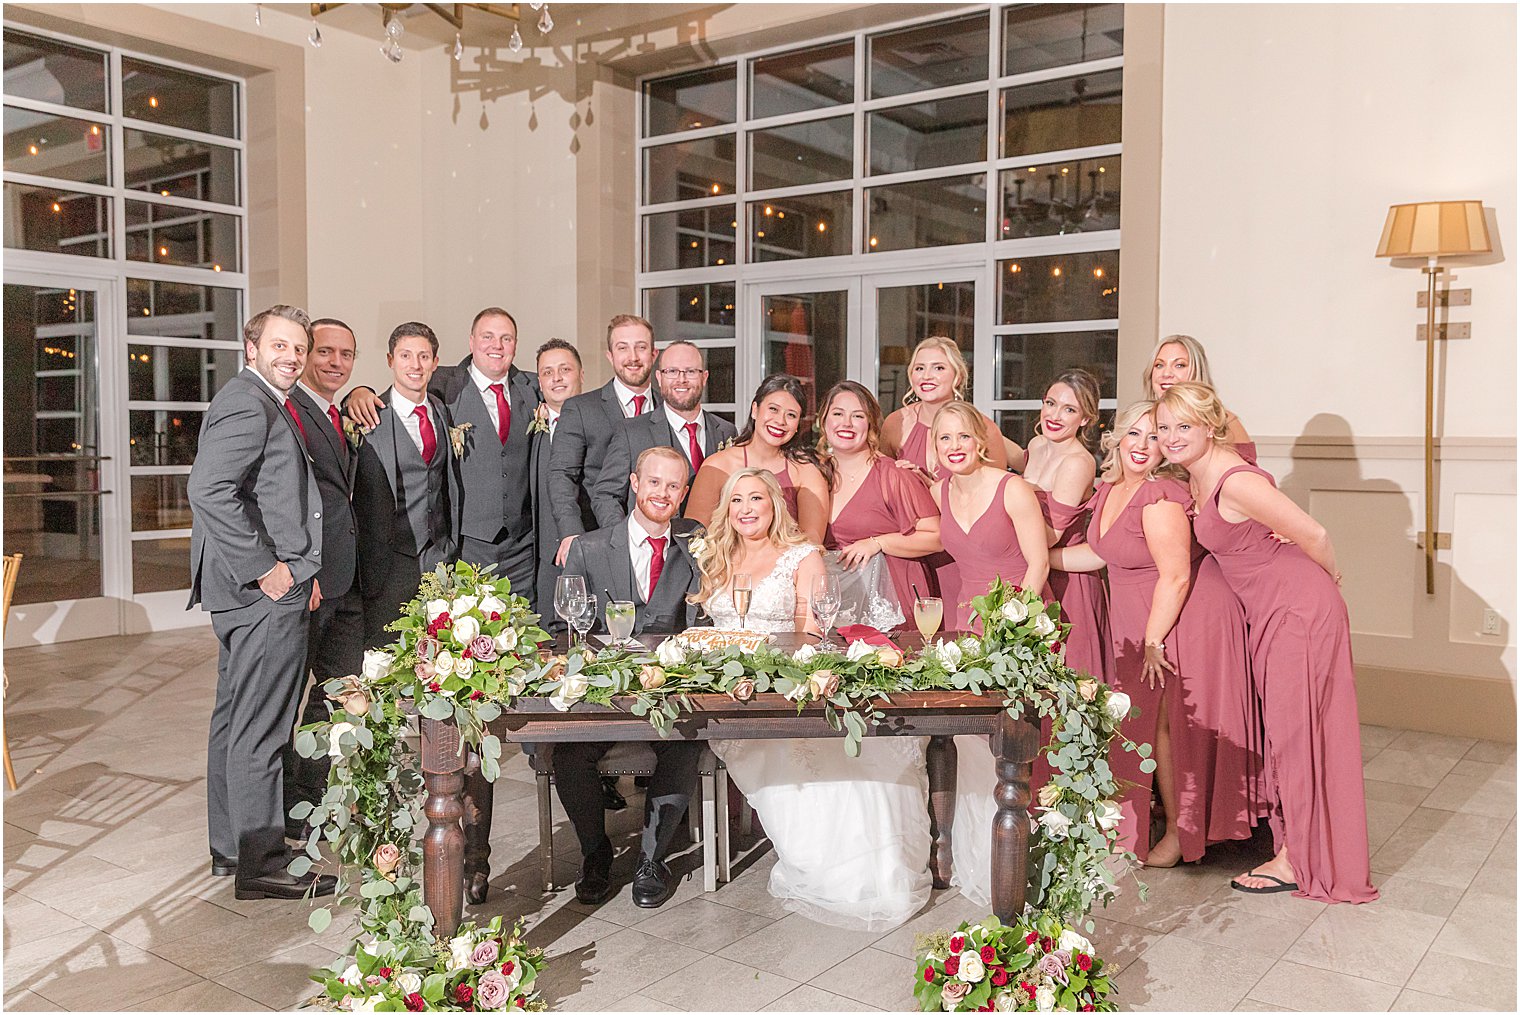 newlyweds sit at sweetheart table with wedding party around them